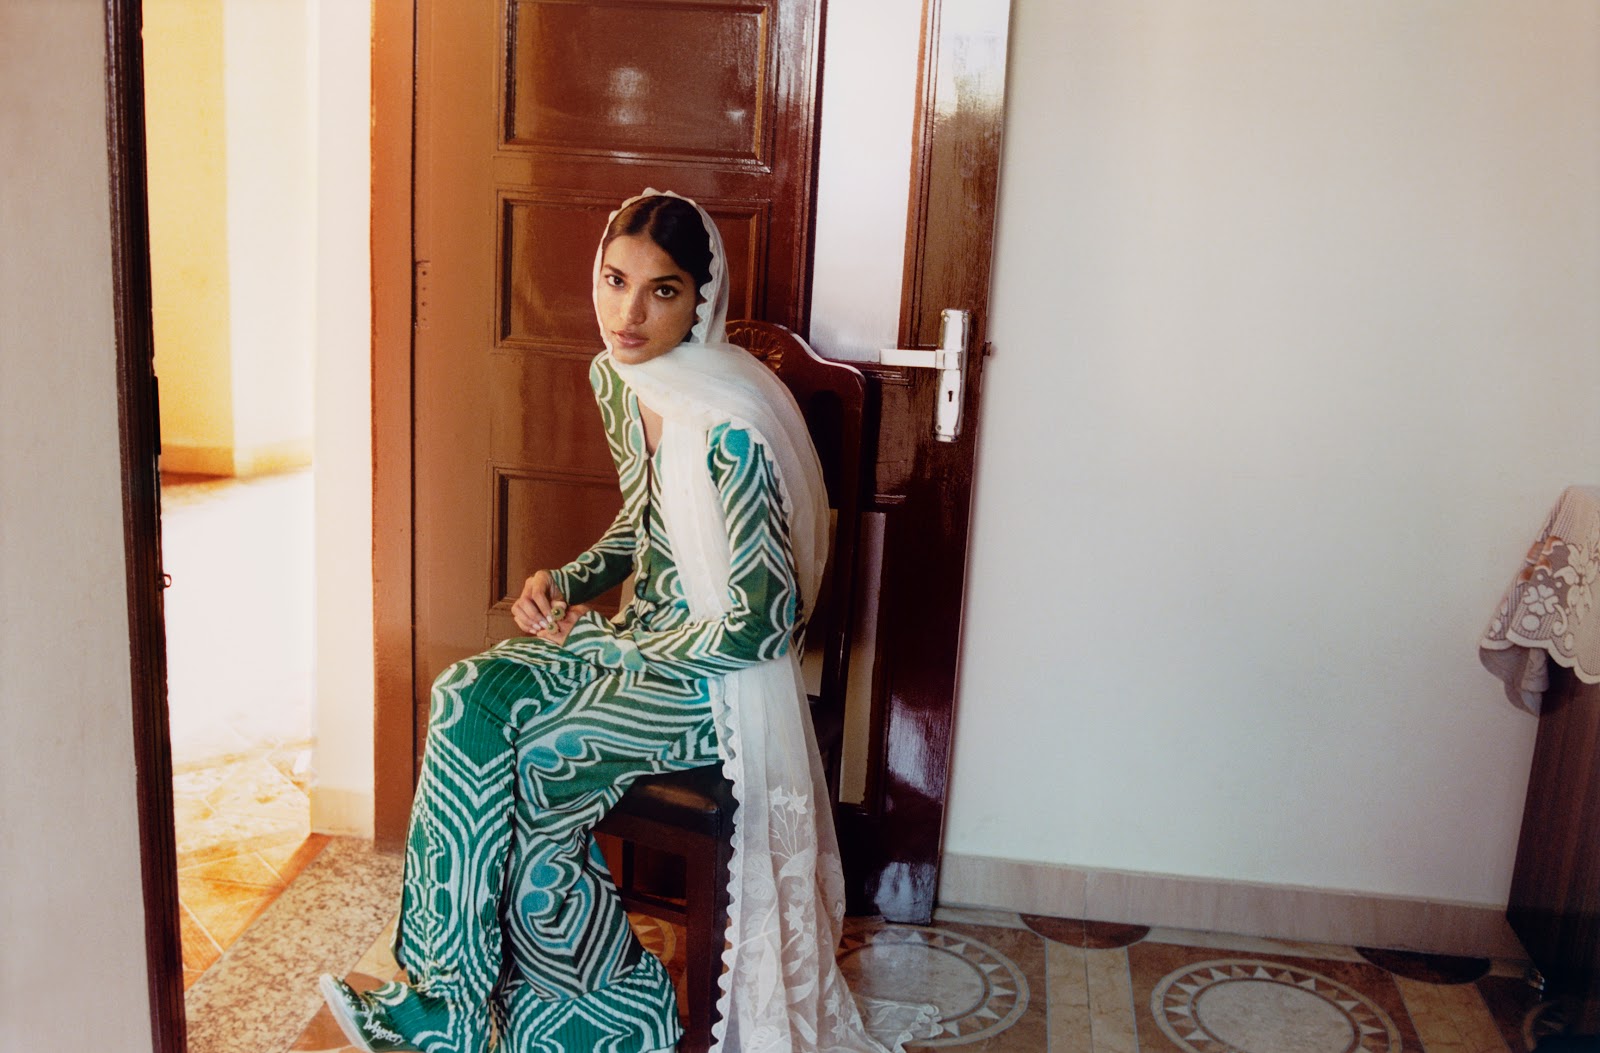 Amrit in Vogue India June/July 2022 by Ashish Shah